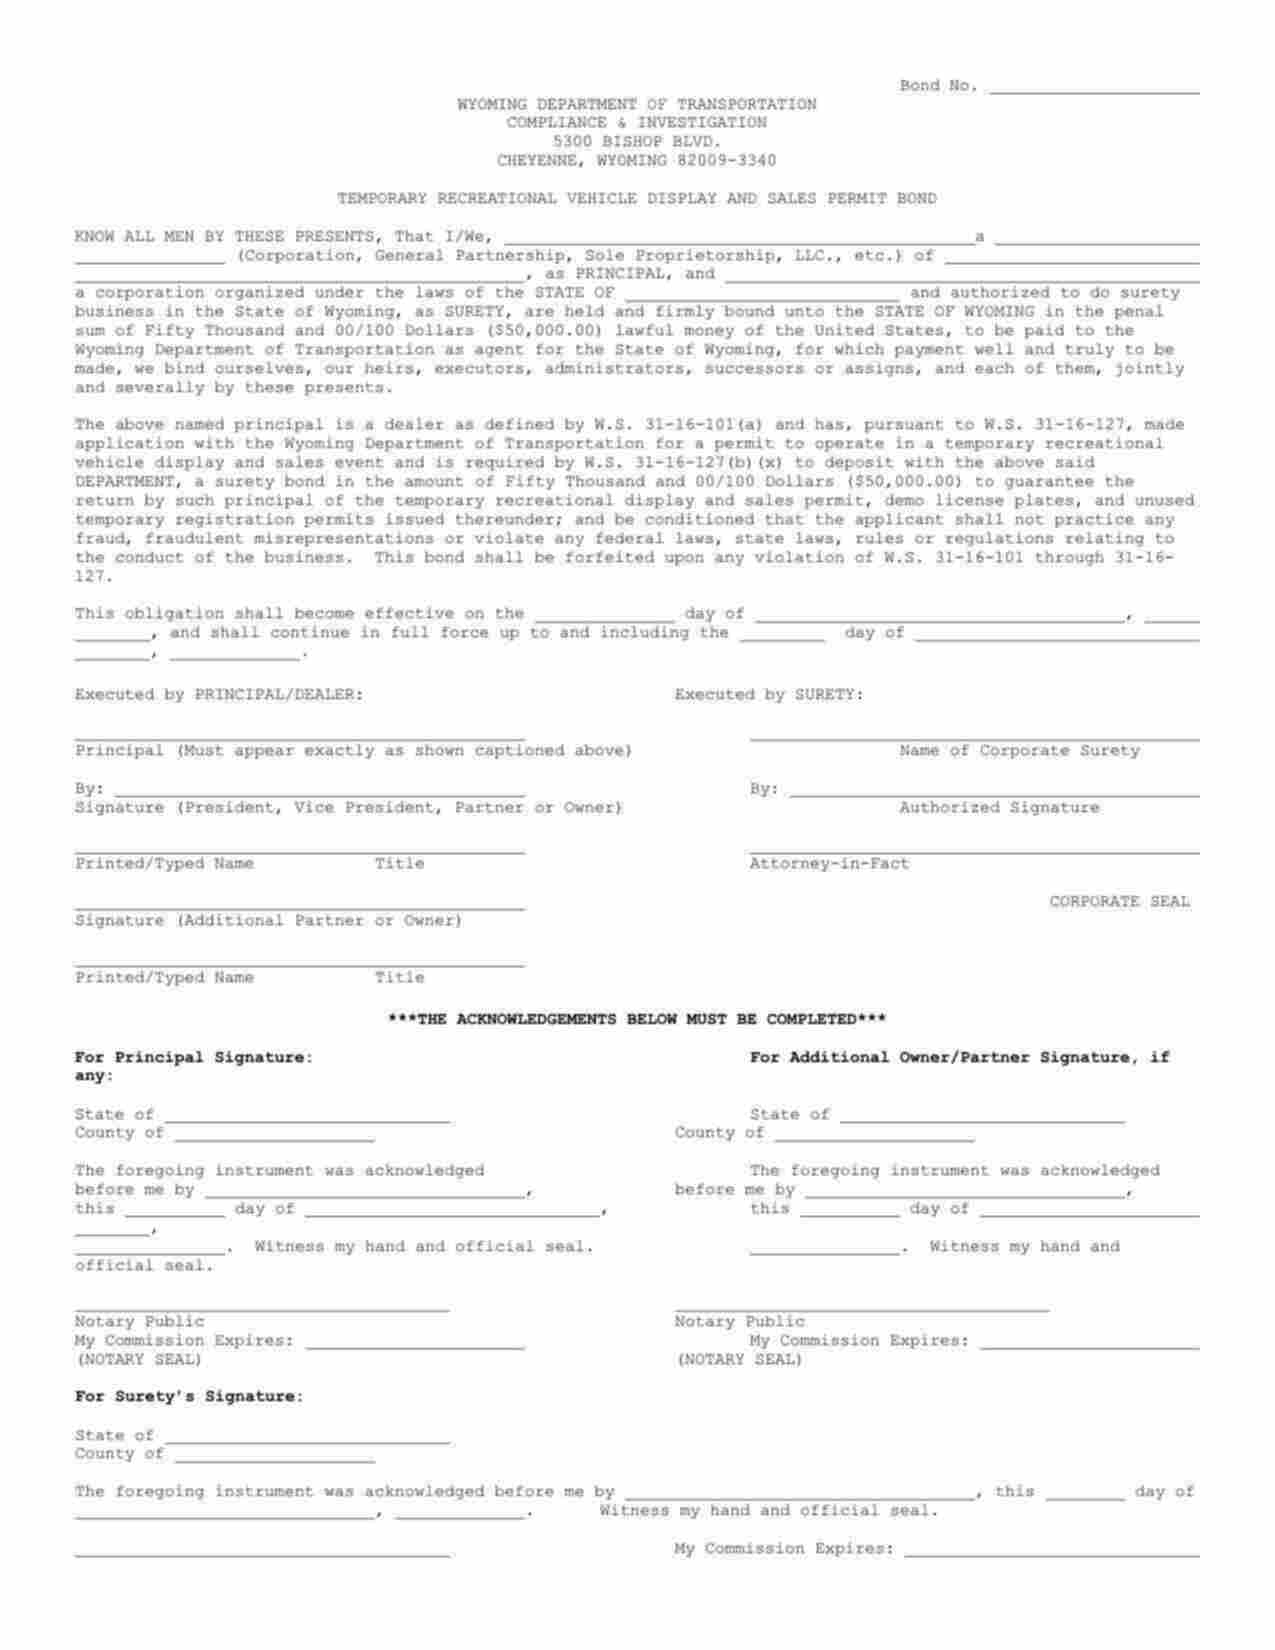 Wyoming Temporary Recreational Vehicle (R/V) Display and Sales Bond Form